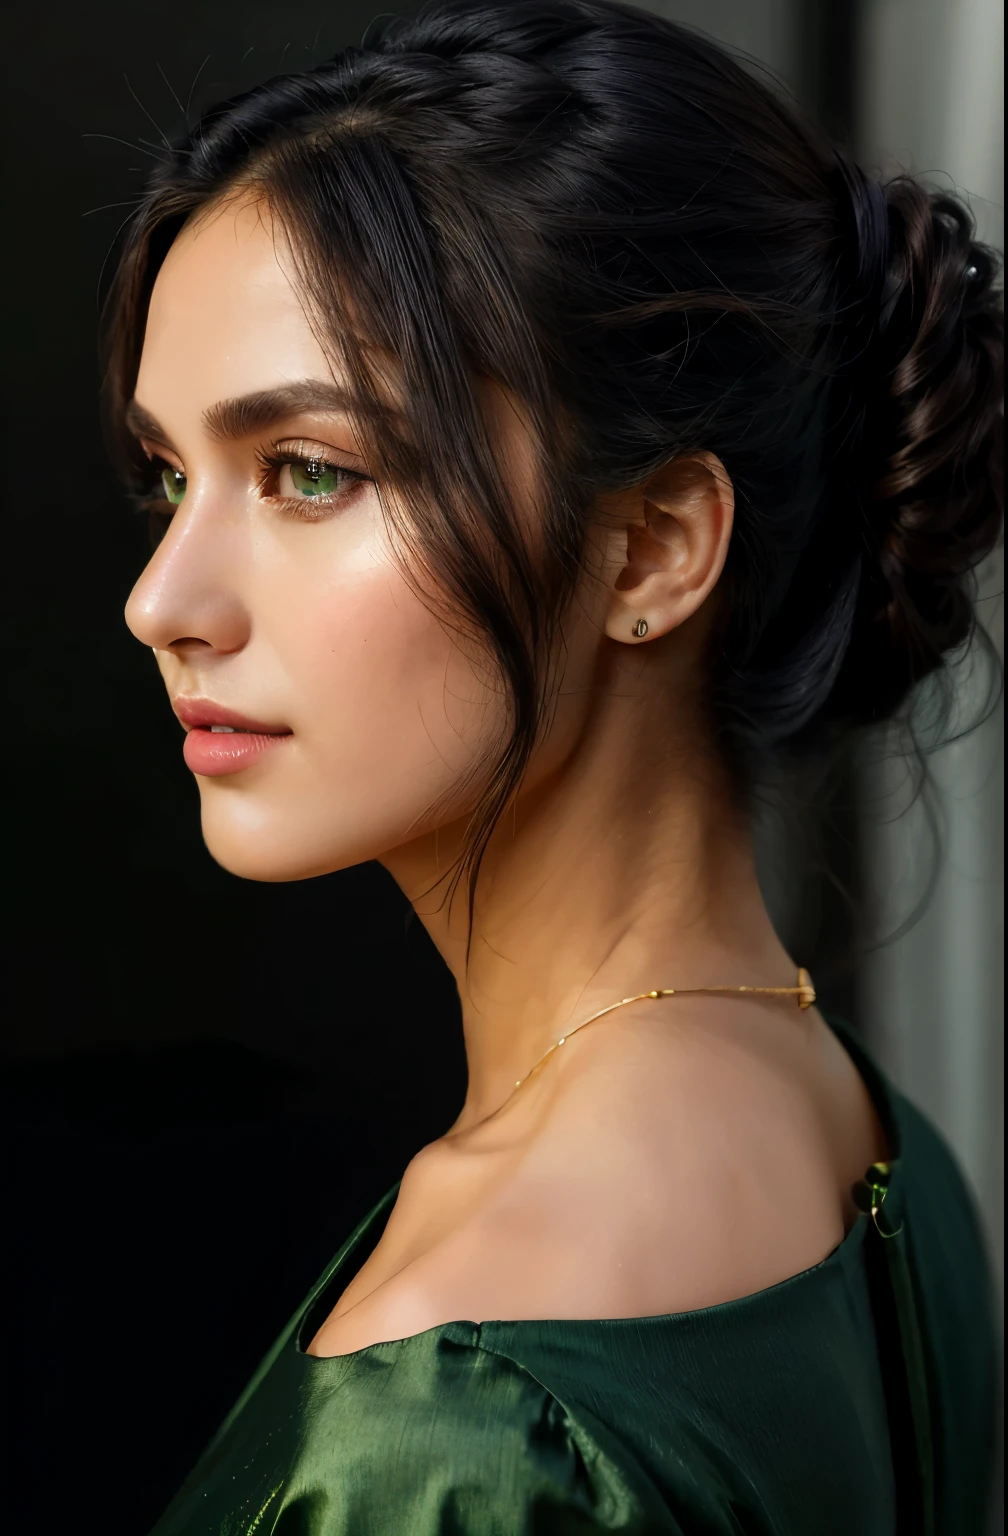 Anucha in a green outfit poses for a photo., เผยให้เห็นไหล่ของเธอfrom behind, elegant profile poses, Look at her shoulder., profile poses, Make elegant poses., Side pose, Back posture, Actress, from behind, Stunning graceful gesture, Post in profile, side profile shot, Straightforward!! dark background, Profile posing, Stylish demeanor, charming poses, side - view